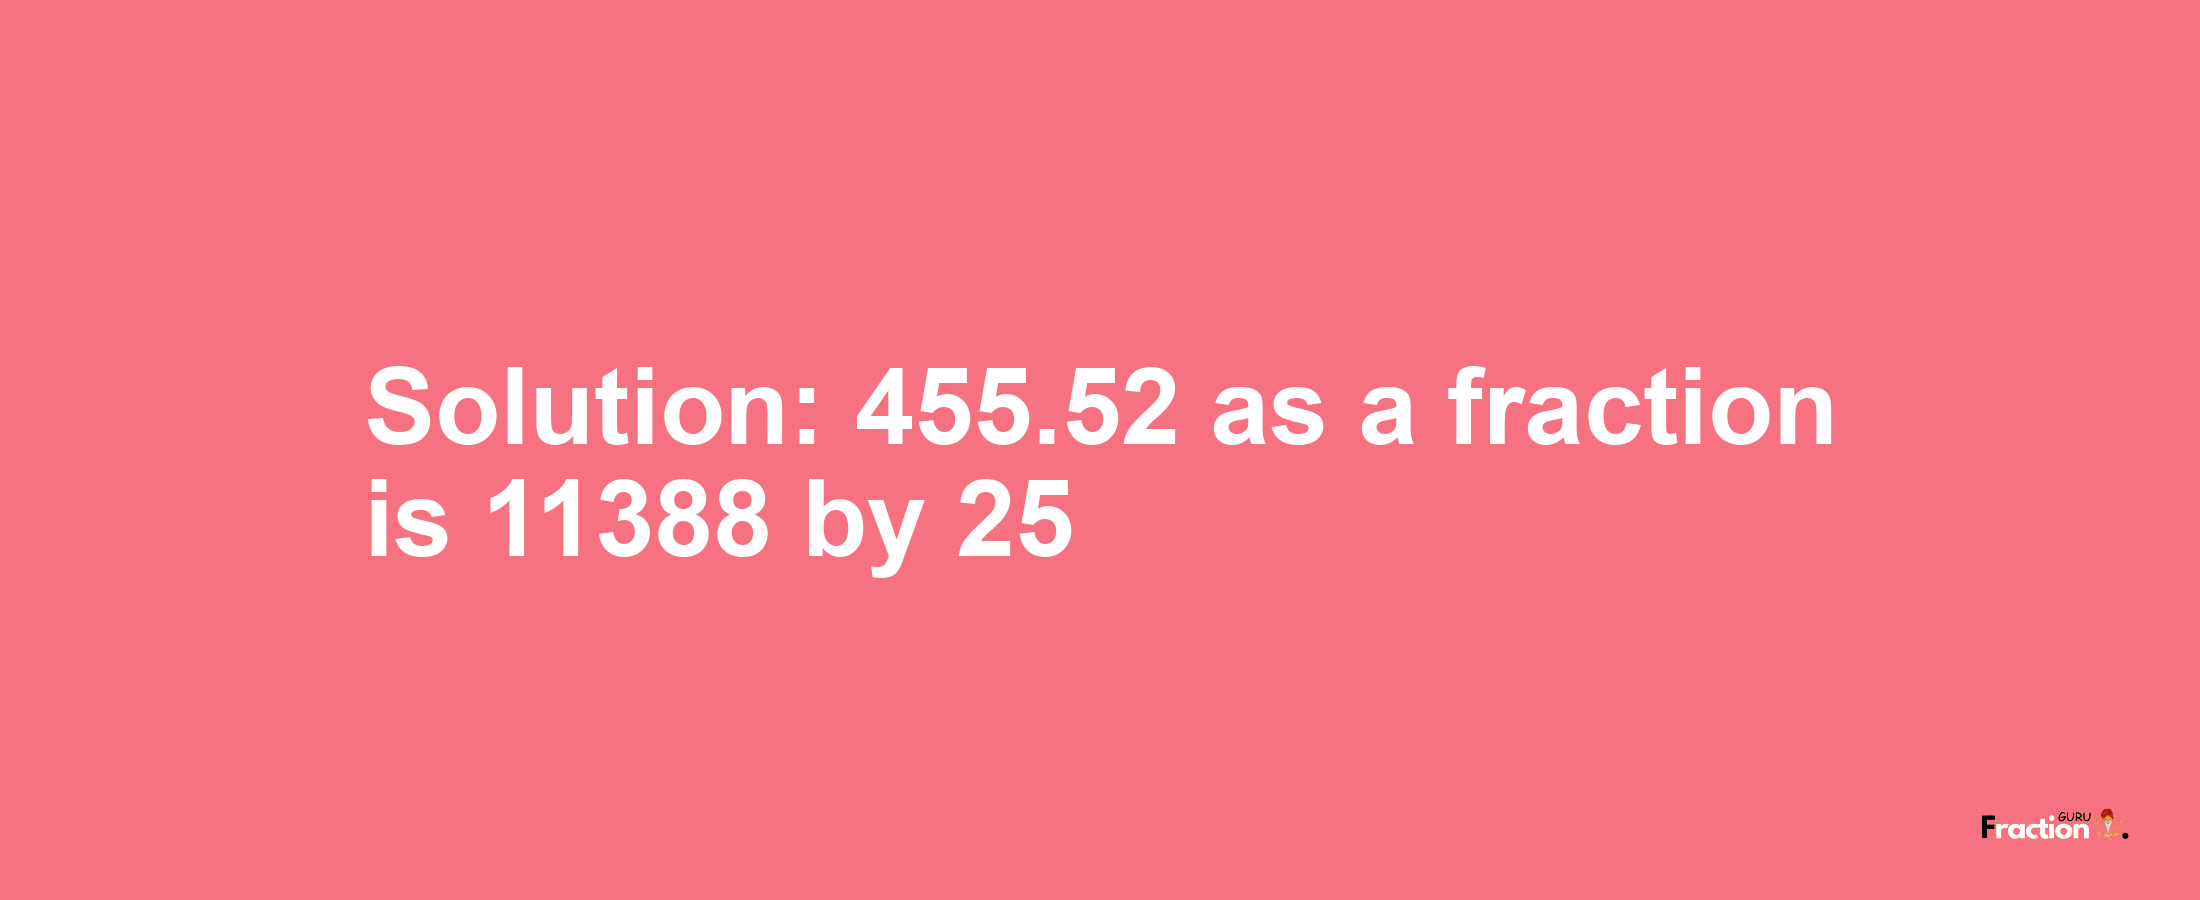 Solution:455.52 as a fraction is 11388/25